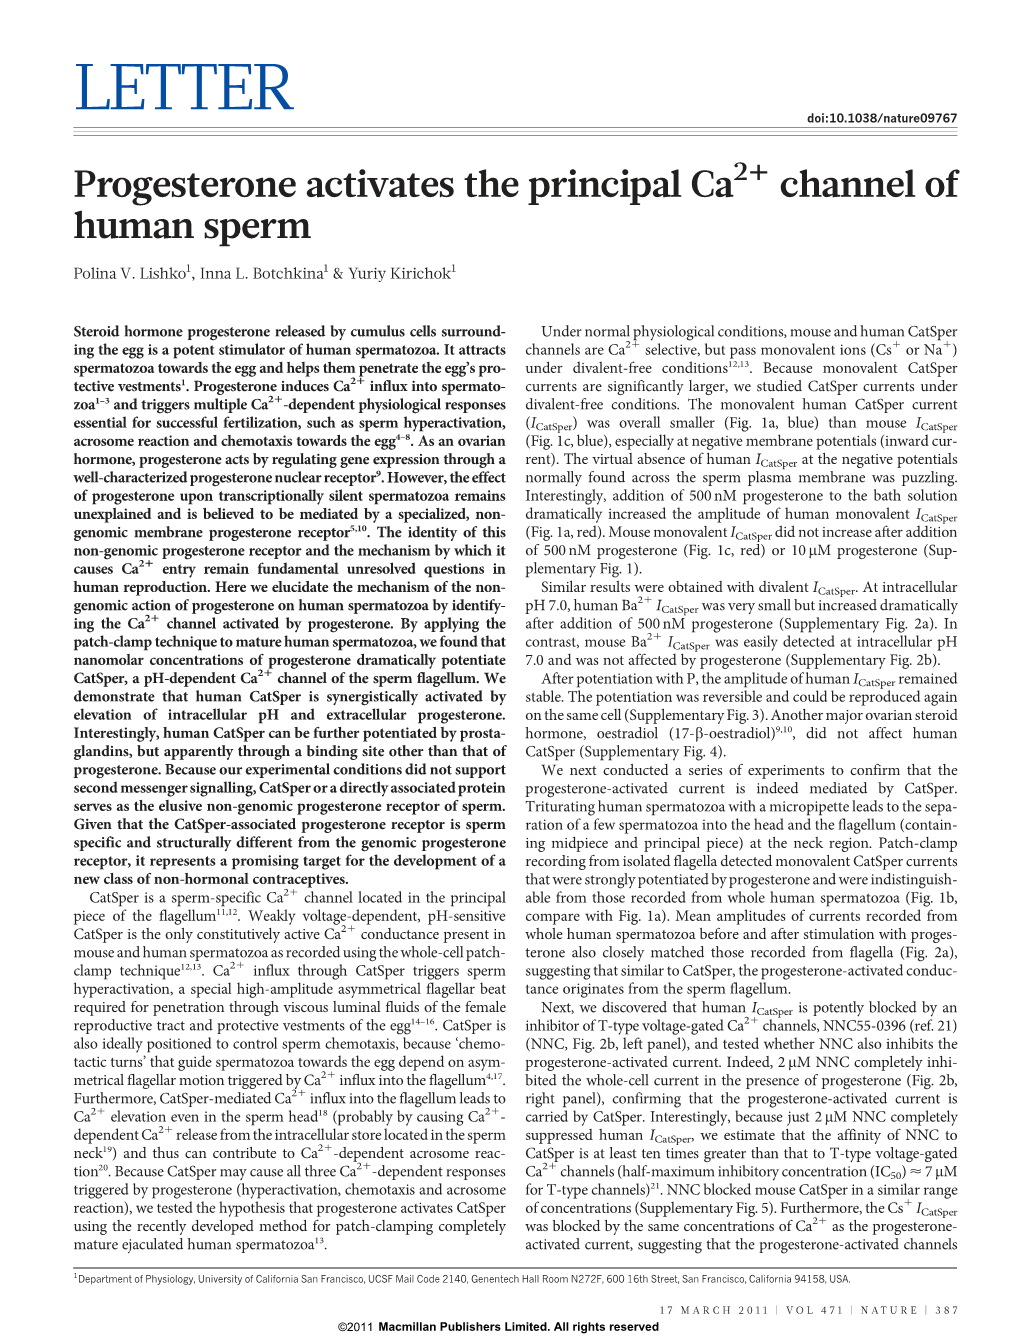 Progesterone Activates the Principal Ca2+ Channel of Human Sperm